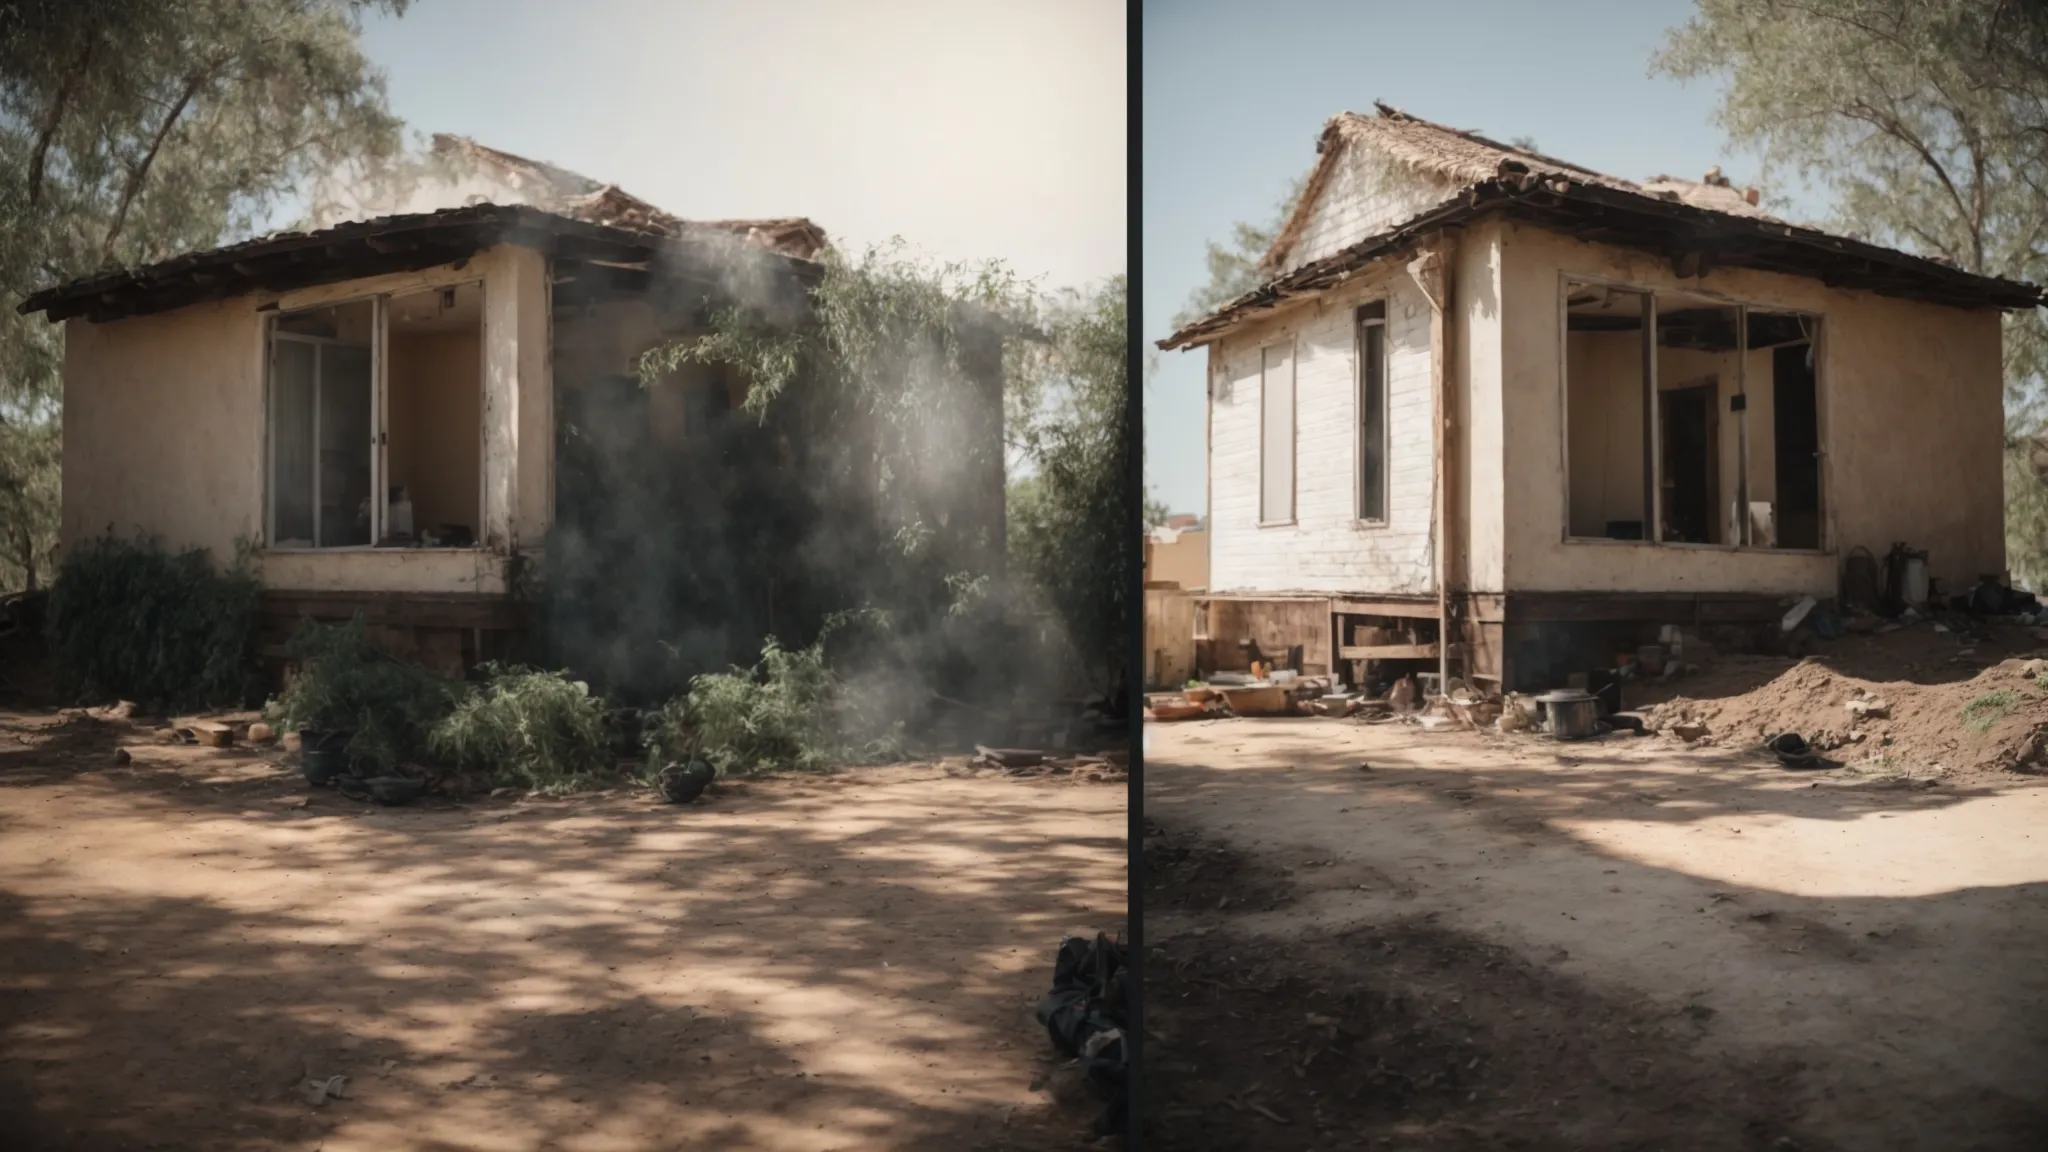 a before and after view of a house, one side covered in dirt and mold, and the other side gleaming under the sunlight, with a professional cleaning team working in the background.